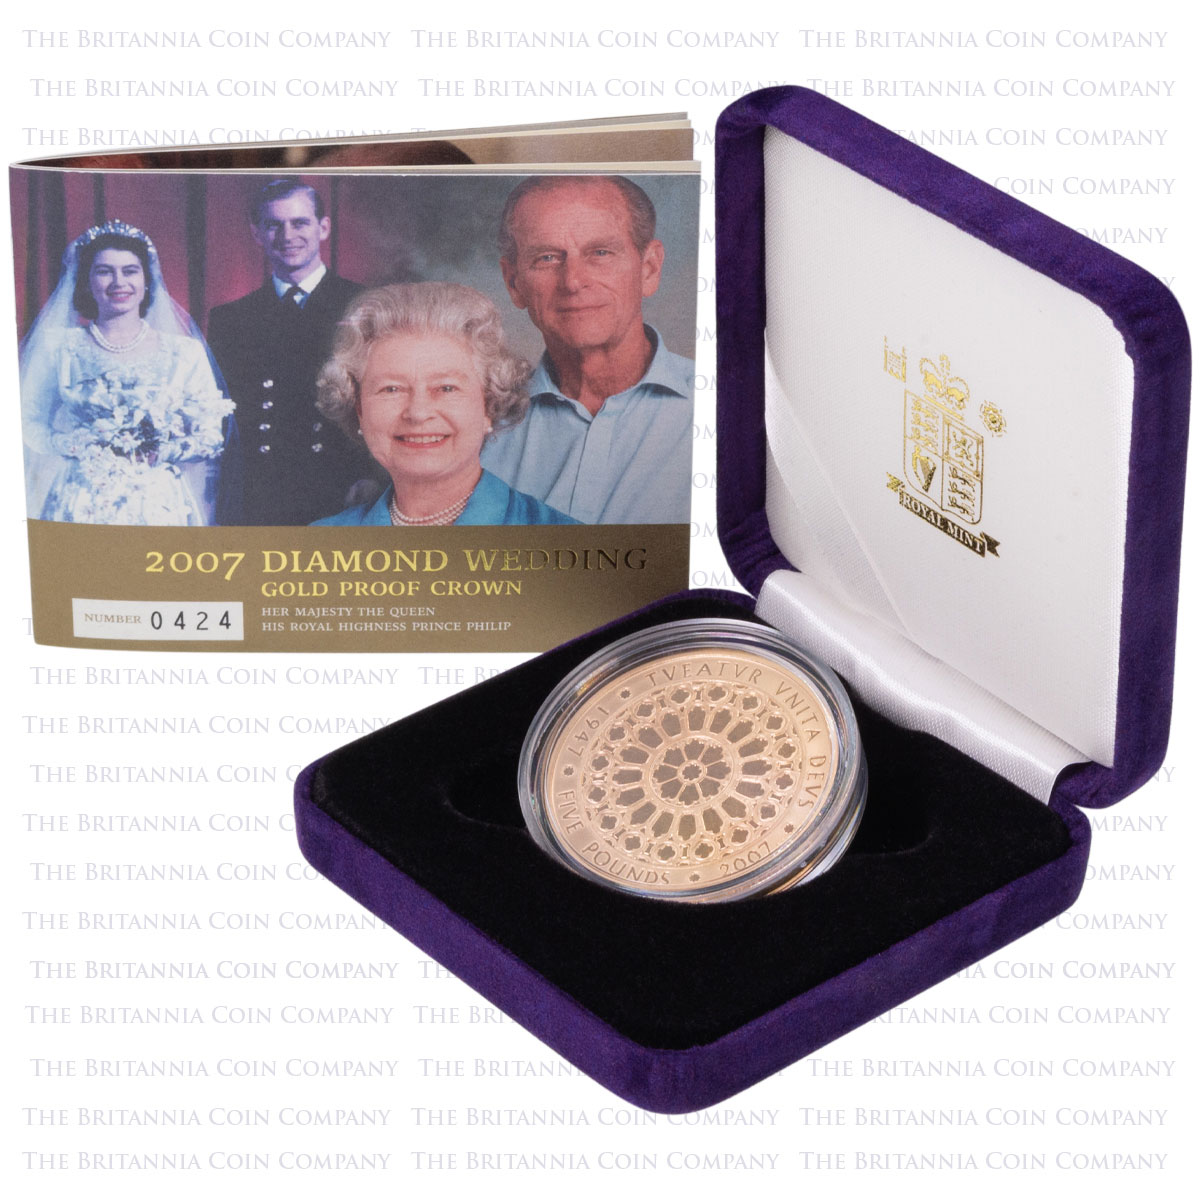 UKDWGP 2007 Diamond Wedding Anniversary Five Pound Crown Gold Proof Coin Boxed